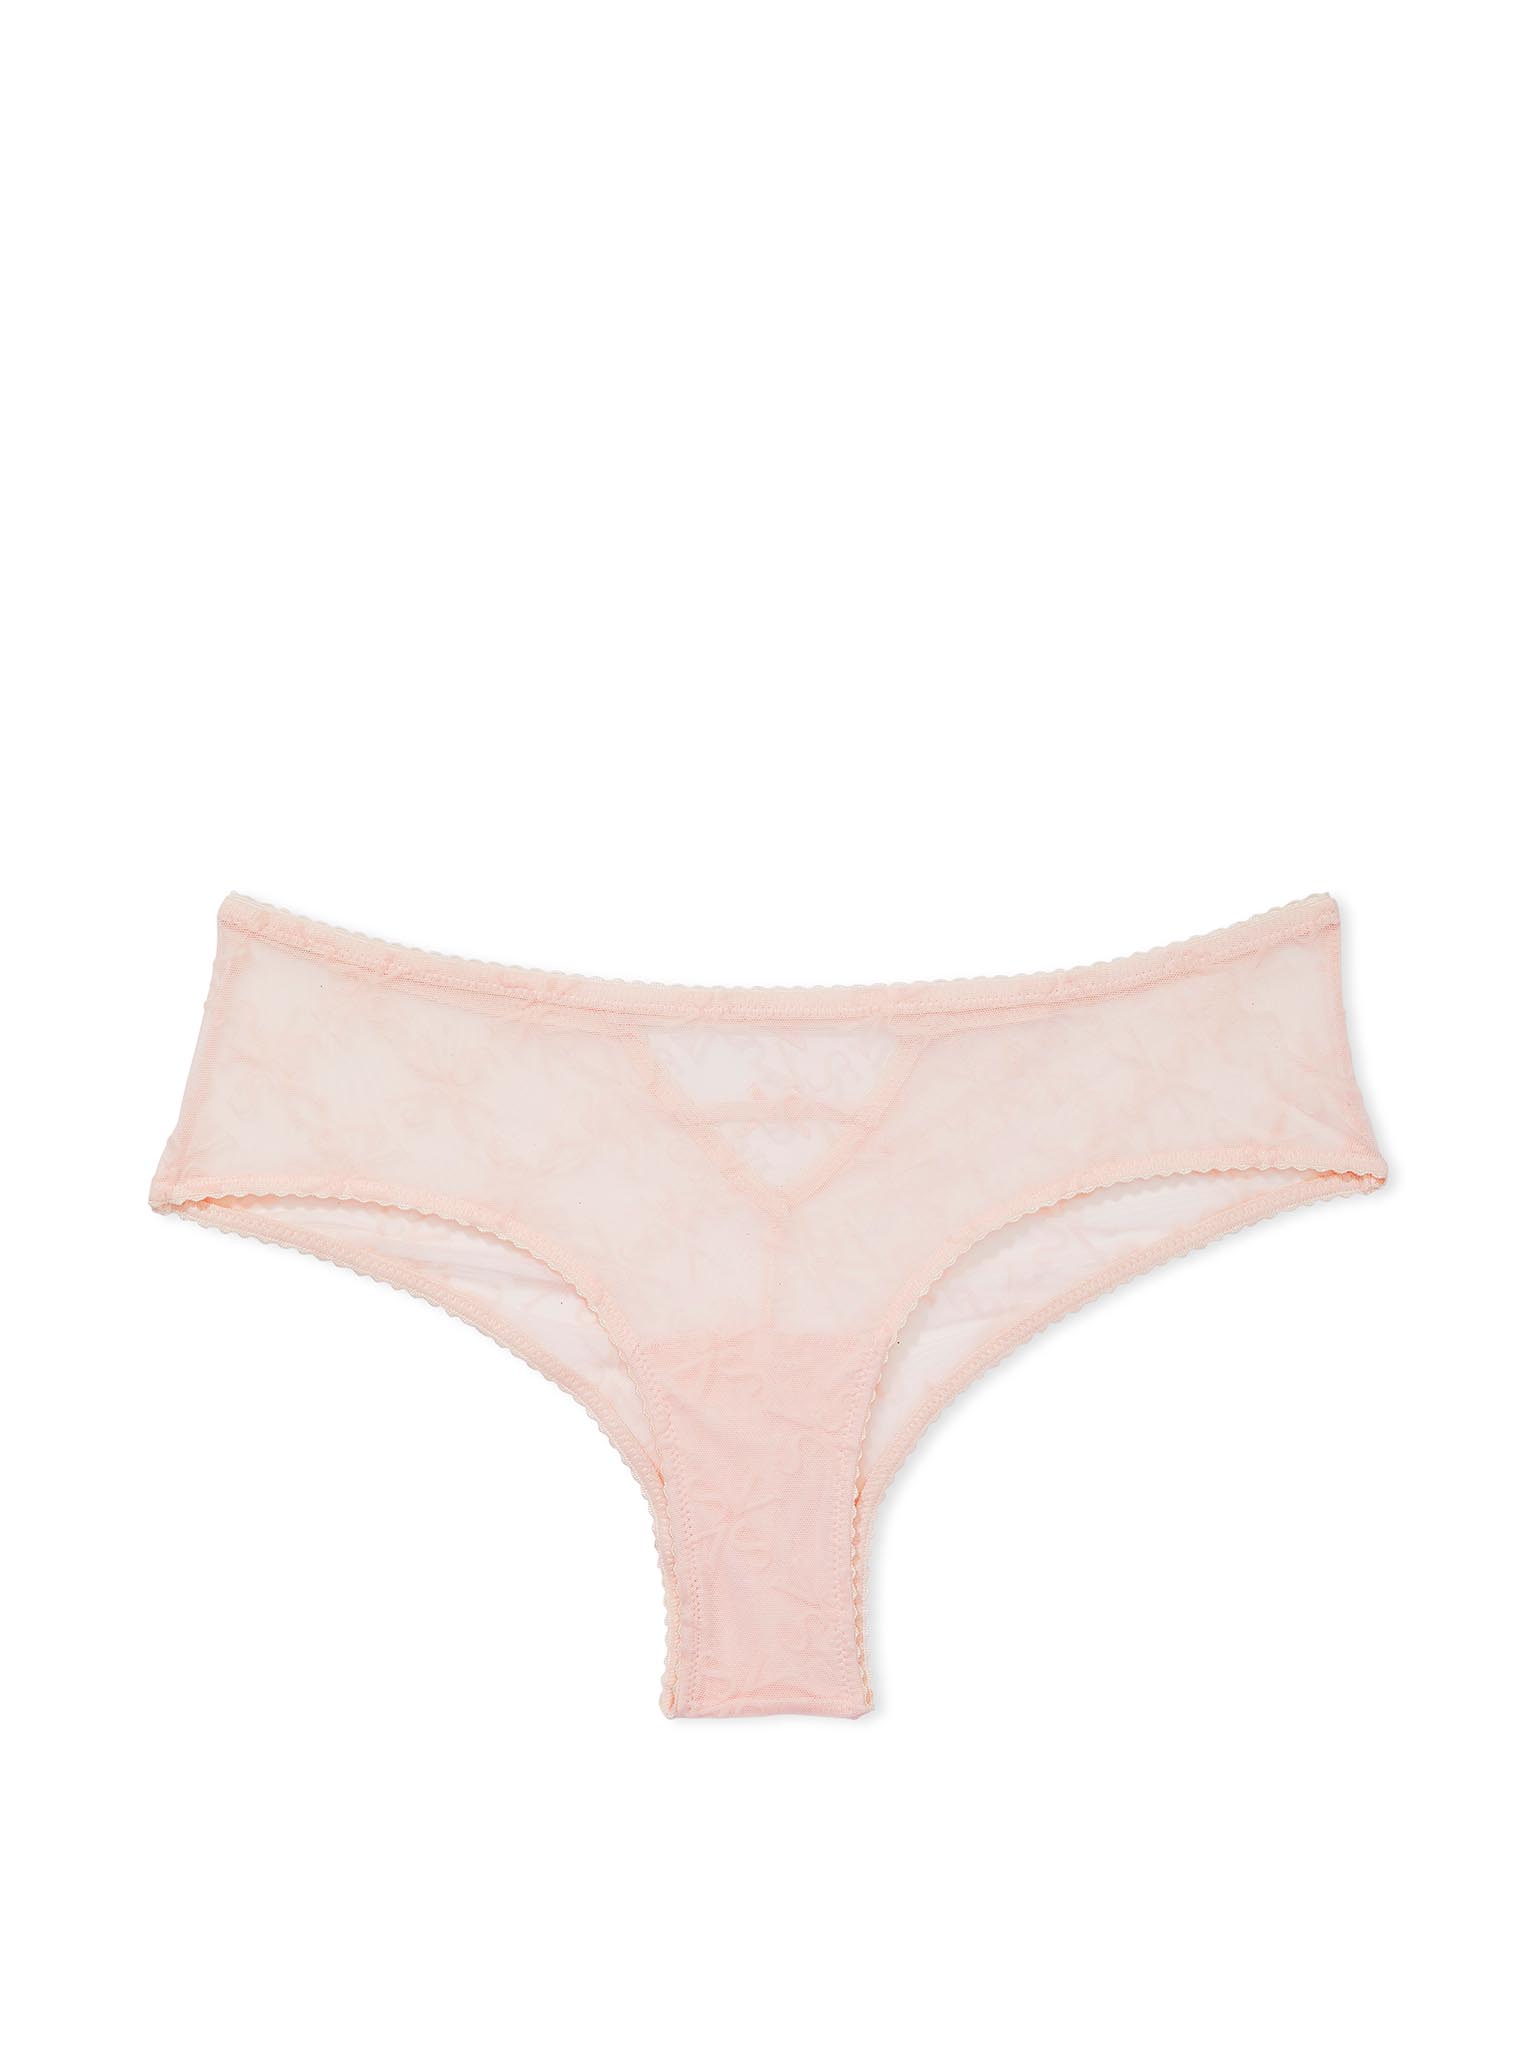 Flocked Logo Mesh Cheeky Panty image number null